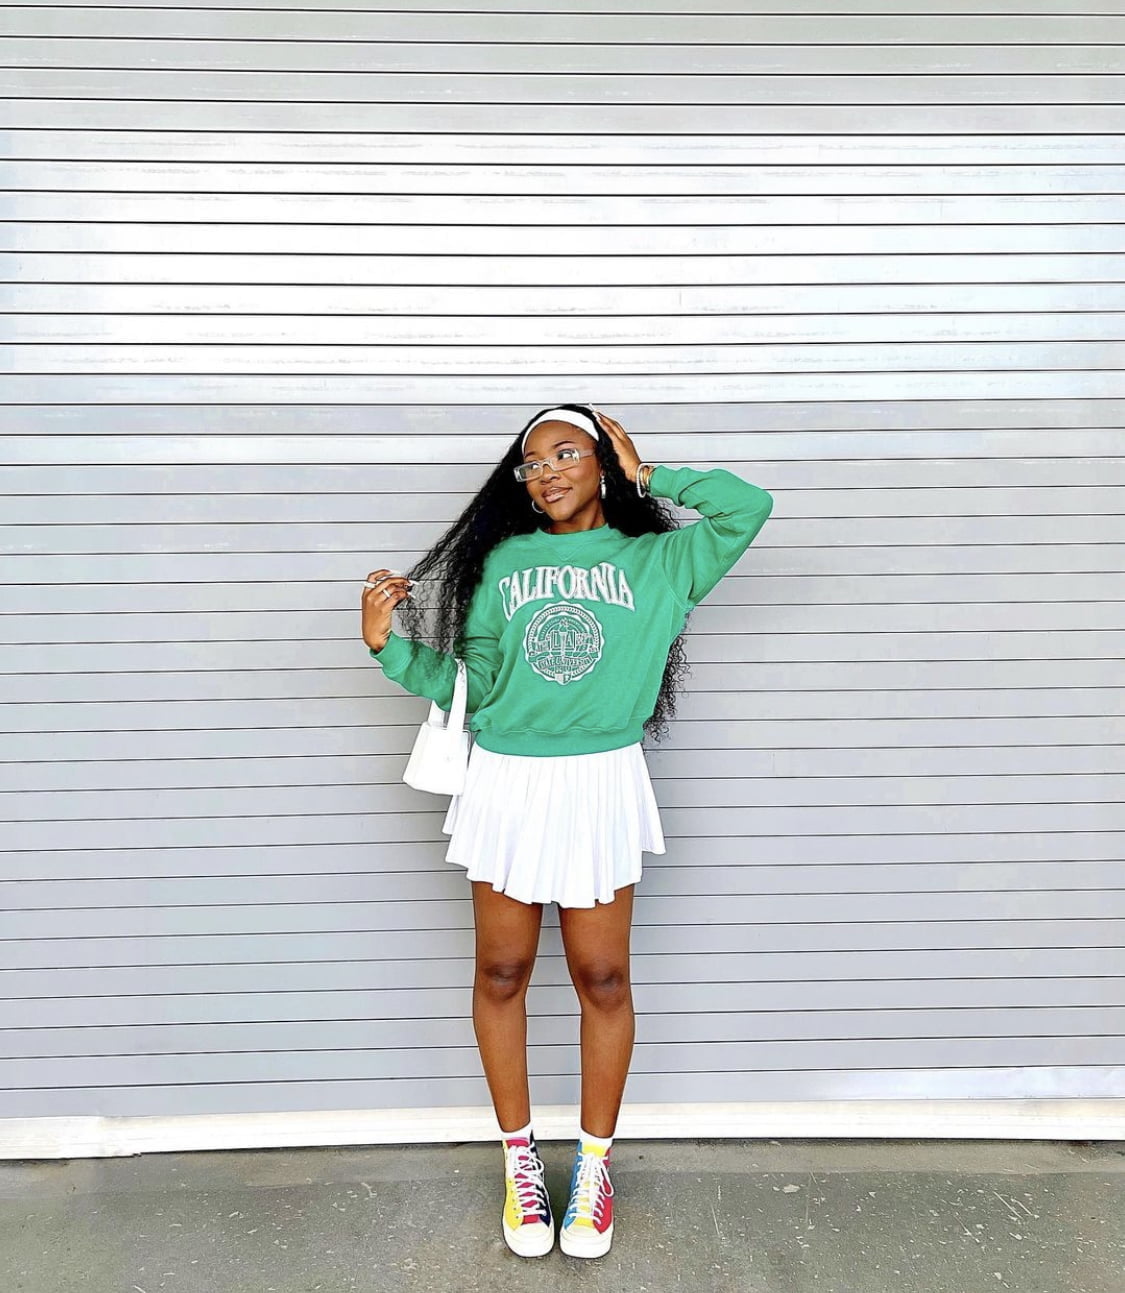 Korean high school fashion inspiration: Green sweater paired with a white pleated skirt, sneakers, and a white headband.